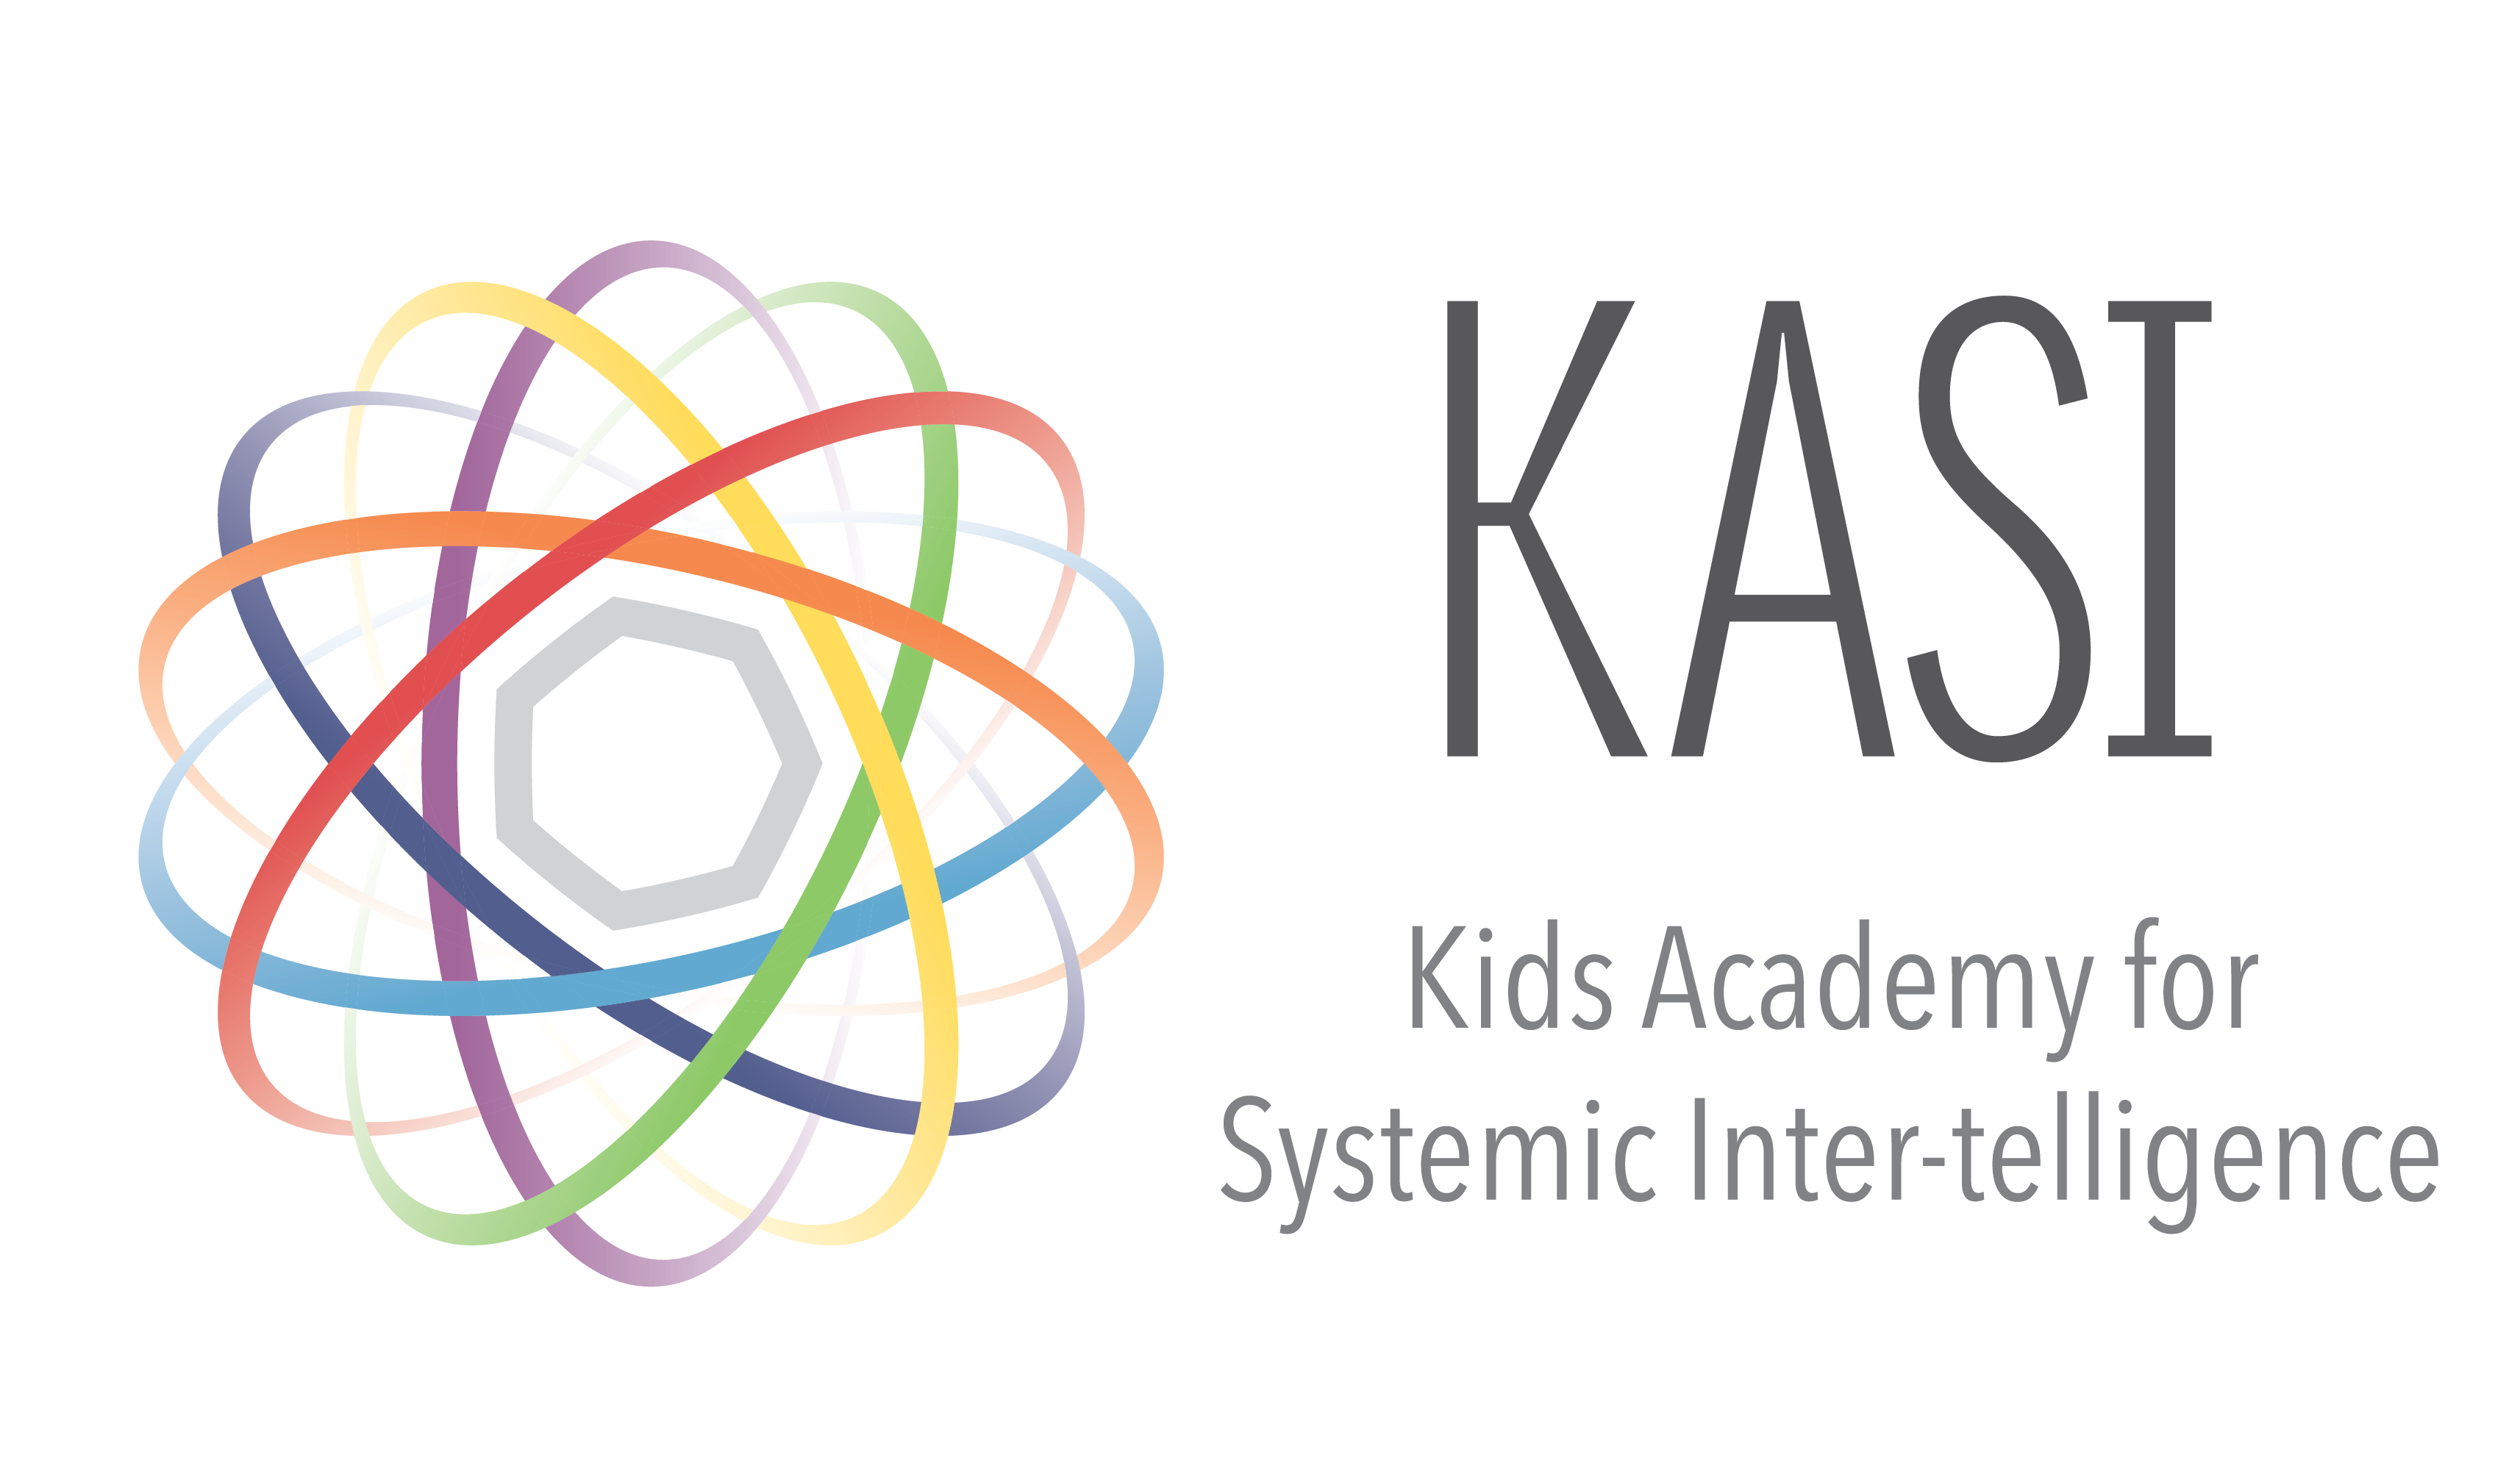 Kids Academy for Systemic Inter-telligence